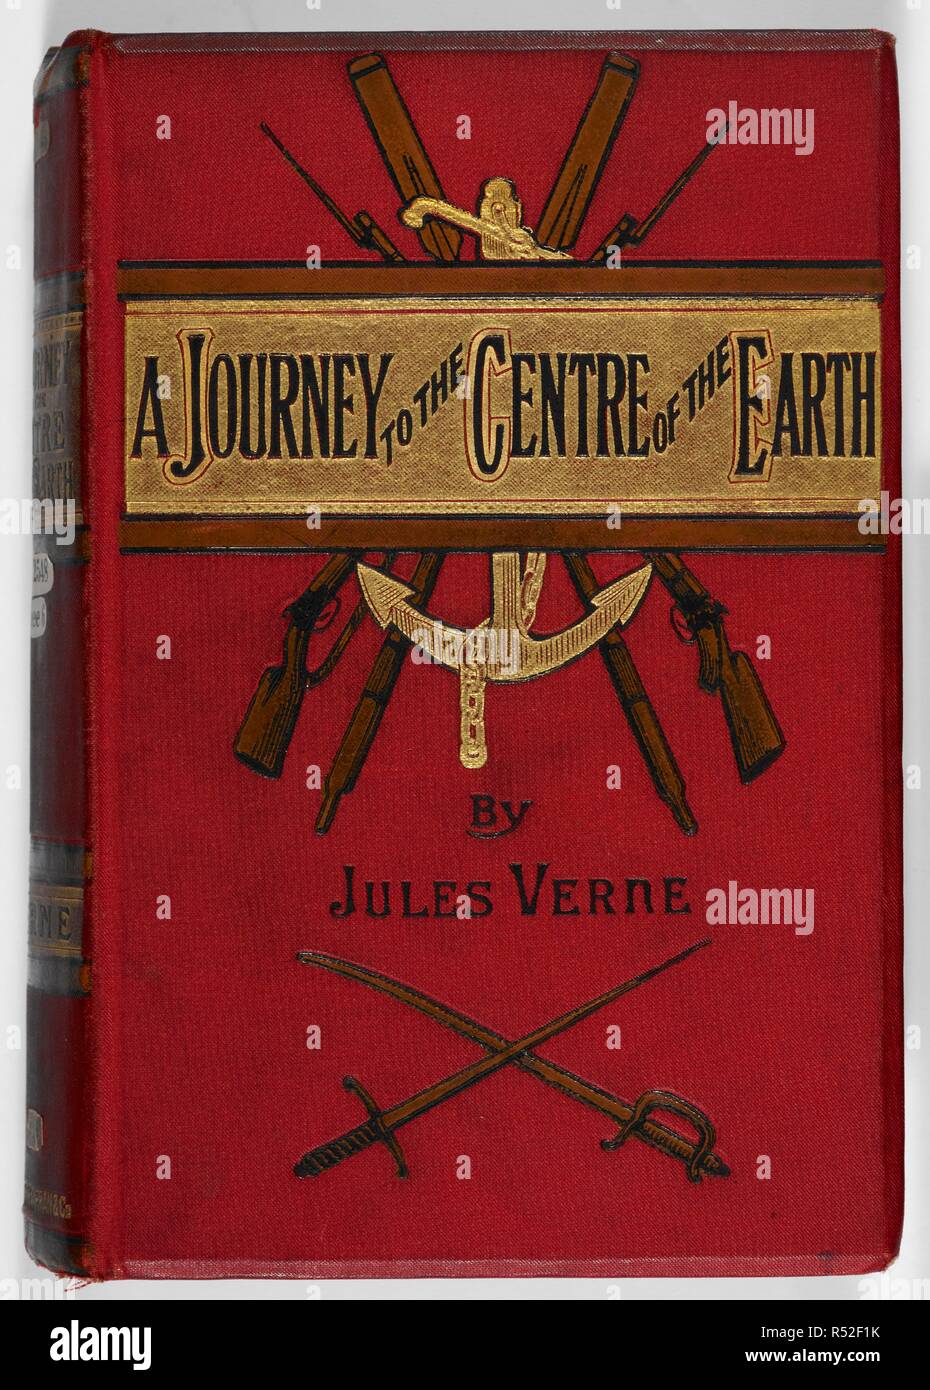 Illustrated front cover of the science fiction novel by Jules Verne. A Journey to the Centre of the Earth New edition With illustrations, etc. Griffith & Farran: London & Sydney, [1891.]. Source: 012548.eee.6 front cover. Stock Photo